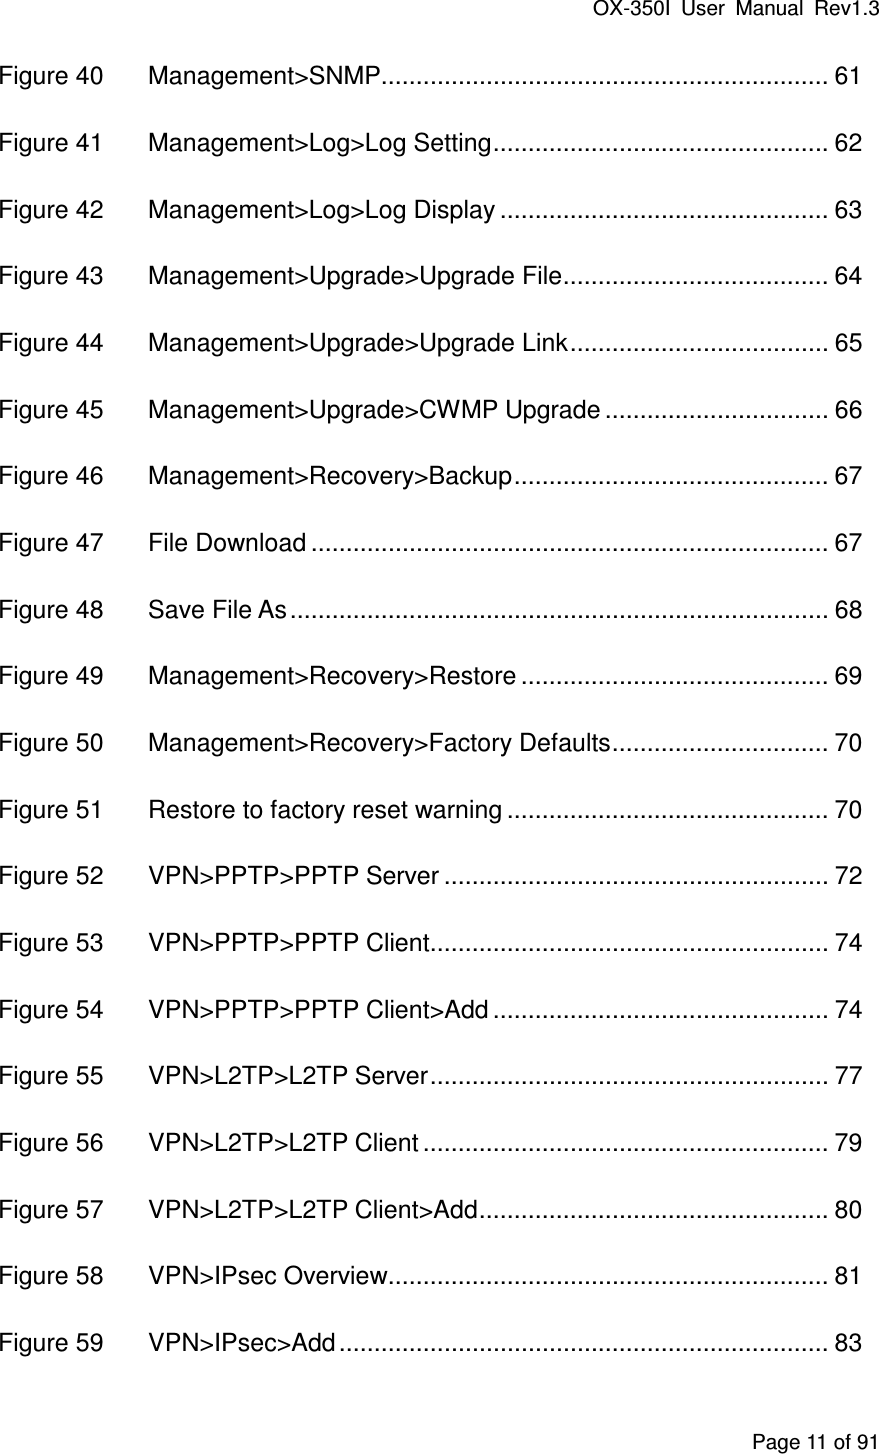 OX-350I  User  Manual  Rev1.3 Page 11 of 91 Figure 40 Management&gt;SNMP................................................................ 61 Figure 41 Management&gt;Log&gt;Log Setting ................................................ 62 Figure 42 Management&gt;Log&gt;Log Display ............................................... 63 Figure 43 Management&gt;Upgrade&gt;Upgrade File ...................................... 64 Figure 44 Management&gt;Upgrade&gt;Upgrade Link ..................................... 65 Figure 45 Management&gt;Upgrade&gt;CWMP Upgrade ................................ 66 Figure 46 Management&gt;Recovery&gt;Backup ............................................. 67 Figure 47 File Download .......................................................................... 67 Figure 48 Save File As ............................................................................. 68 Figure 49 Management&gt;Recovery&gt;Restore ............................................ 69 Figure 50 Management&gt;Recovery&gt;Factory Defaults ............................... 70 Figure 51 Restore to factory reset warning .............................................. 70 Figure 52 VPN&gt;PPTP&gt;PPTP Server ....................................................... 72 Figure 53 VPN&gt;PPTP&gt;PPTP Client ......................................................... 74 Figure 54 VPN&gt;PPTP&gt;PPTP Client&gt;Add ................................................ 74 Figure 55 VPN&gt;L2TP&gt;L2TP Server ......................................................... 77 Figure 56 VPN&gt;L2TP&gt;L2TP Client .......................................................... 79 Figure 57 VPN&gt;L2TP&gt;L2TP Client&gt;Add .................................................. 80 Figure 58 VPN&gt;IPsec Overview............................................................... 81 Figure 59 VPN&gt;IPsec&gt;Add ...................................................................... 83 